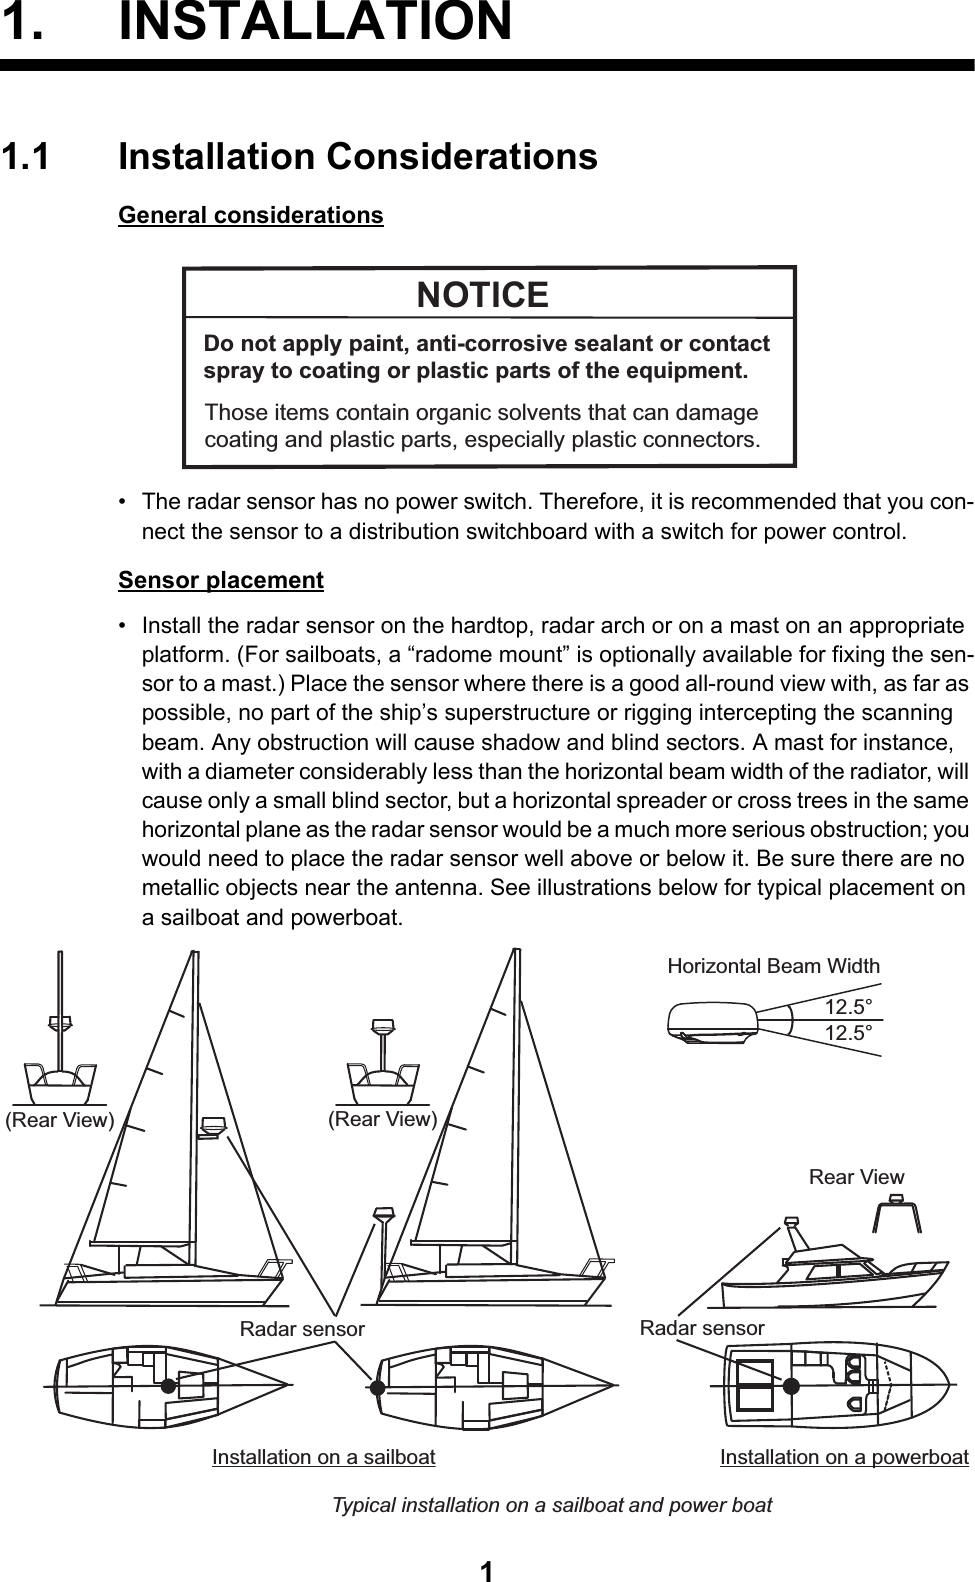 11. INSTALLATION1.1 Installation ConsiderationsGeneral considerations•  The radar sensor has no power switch. Therefore, it is recommended that you con-nect the sensor to a distribution switchboard with a switch for power control.Sensor placement•  Install the radar sensor on the hardtop, radar arch or on a mast on an appropriate platform. (For sailboats, a “radome mount” is optionally available for fixing the sen-sor to a mast.) Place the sensor where there is a good all-round view with, as far as possible, no part of the ship’s superstructure or rigging intercepting the scanning beam. Any obstruction will cause shadow and blind sectors. A mast for instance, with a diameter considerably less than the horizontal beam width of the radiator, will cause only a small blind sector, but a horizontal spreader or cross trees in the same horizontal plane as the radar sensor would be a much more serious obstruction; you would need to place the radar sensor well above or below it. Be sure there are no metallic objects near the antenna. See illustrations below for typical placement on a sailboat and powerboat.NOTICEDo not apply paint, anti-corrosive sealant or contact spray to coating or plastic parts of the equipment. Those items contain organic solvents that can damage coating and plastic parts, especially plastic connectors.Installation on a sailboat Installation on a powerboatTypical installation on a sailboat and power boatRadar sensorRadar sensorRadar sensorRadar sensorRadar sensorRadar sensorRear View(Rear View)(Rear View)Horizontal Beam Width12.5°12.5°